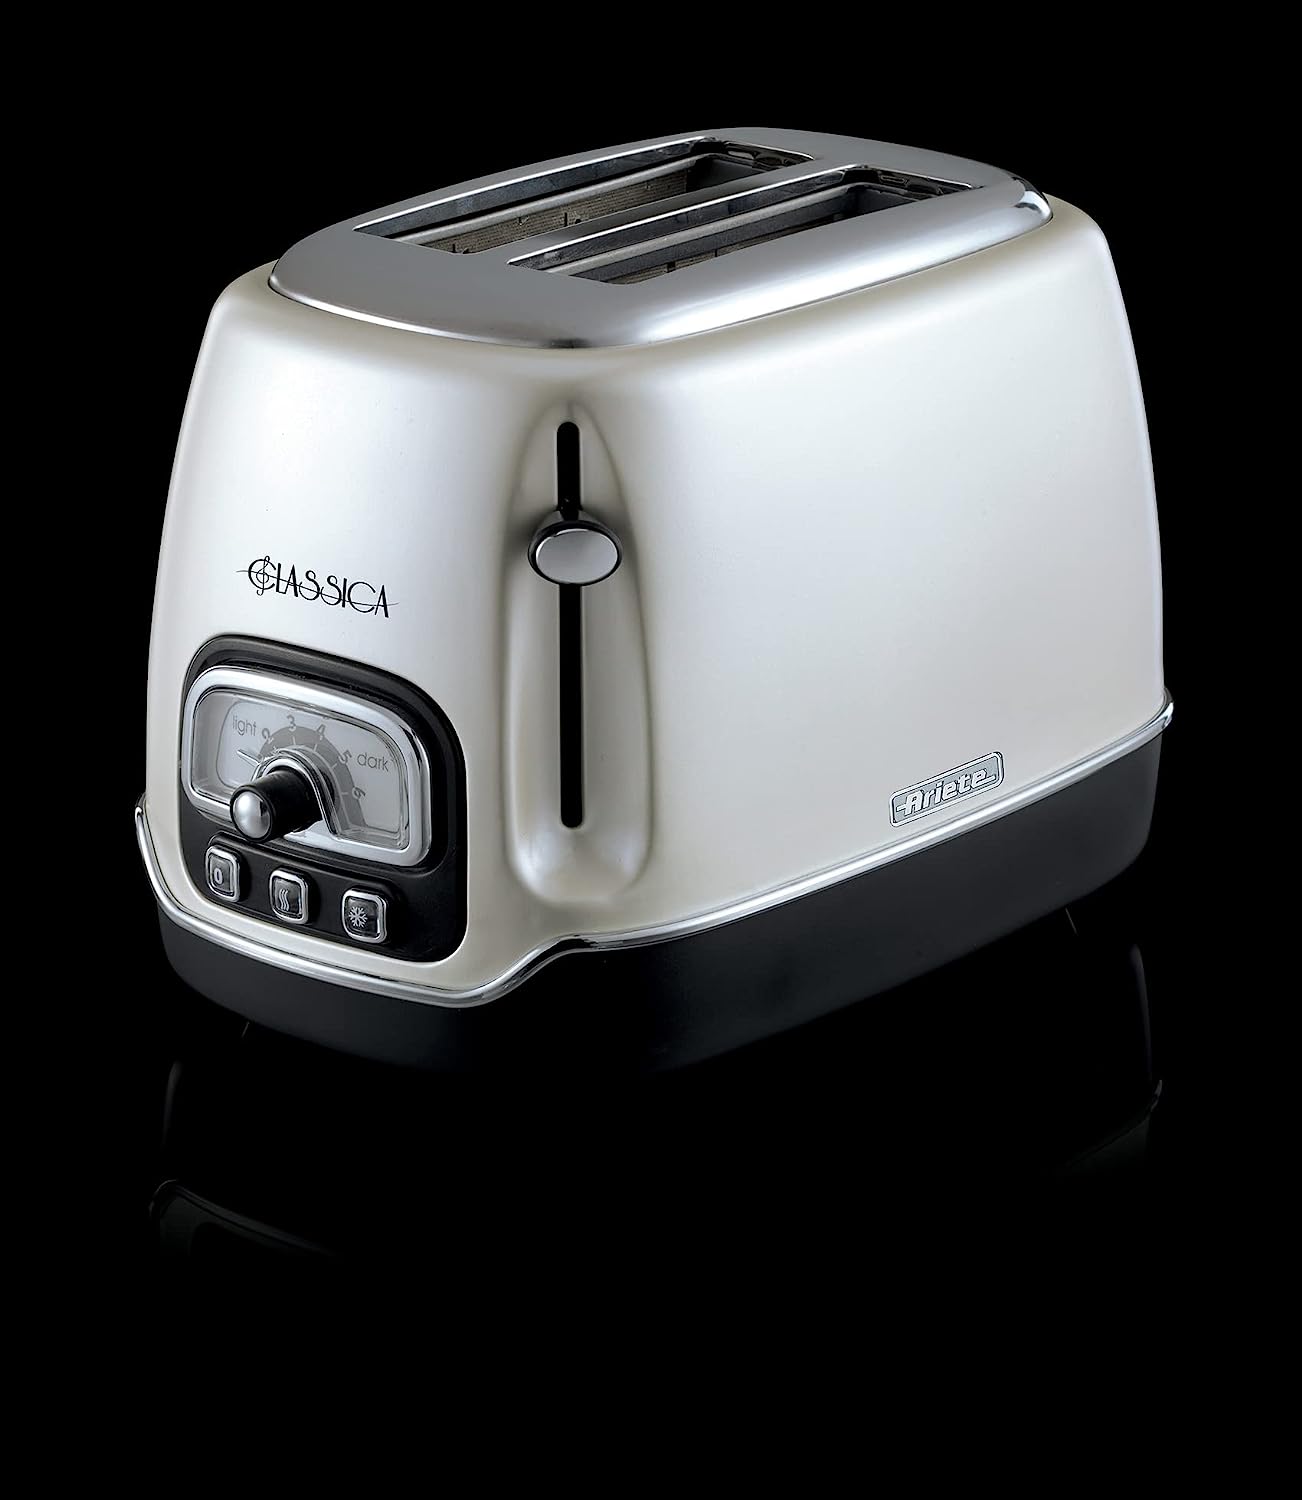 Ariete Tostapane Classica 158/38, Electric Toaster 2 Slices, Without Tongs,  815 W, 3 Functions, 6 Browning Levels, white